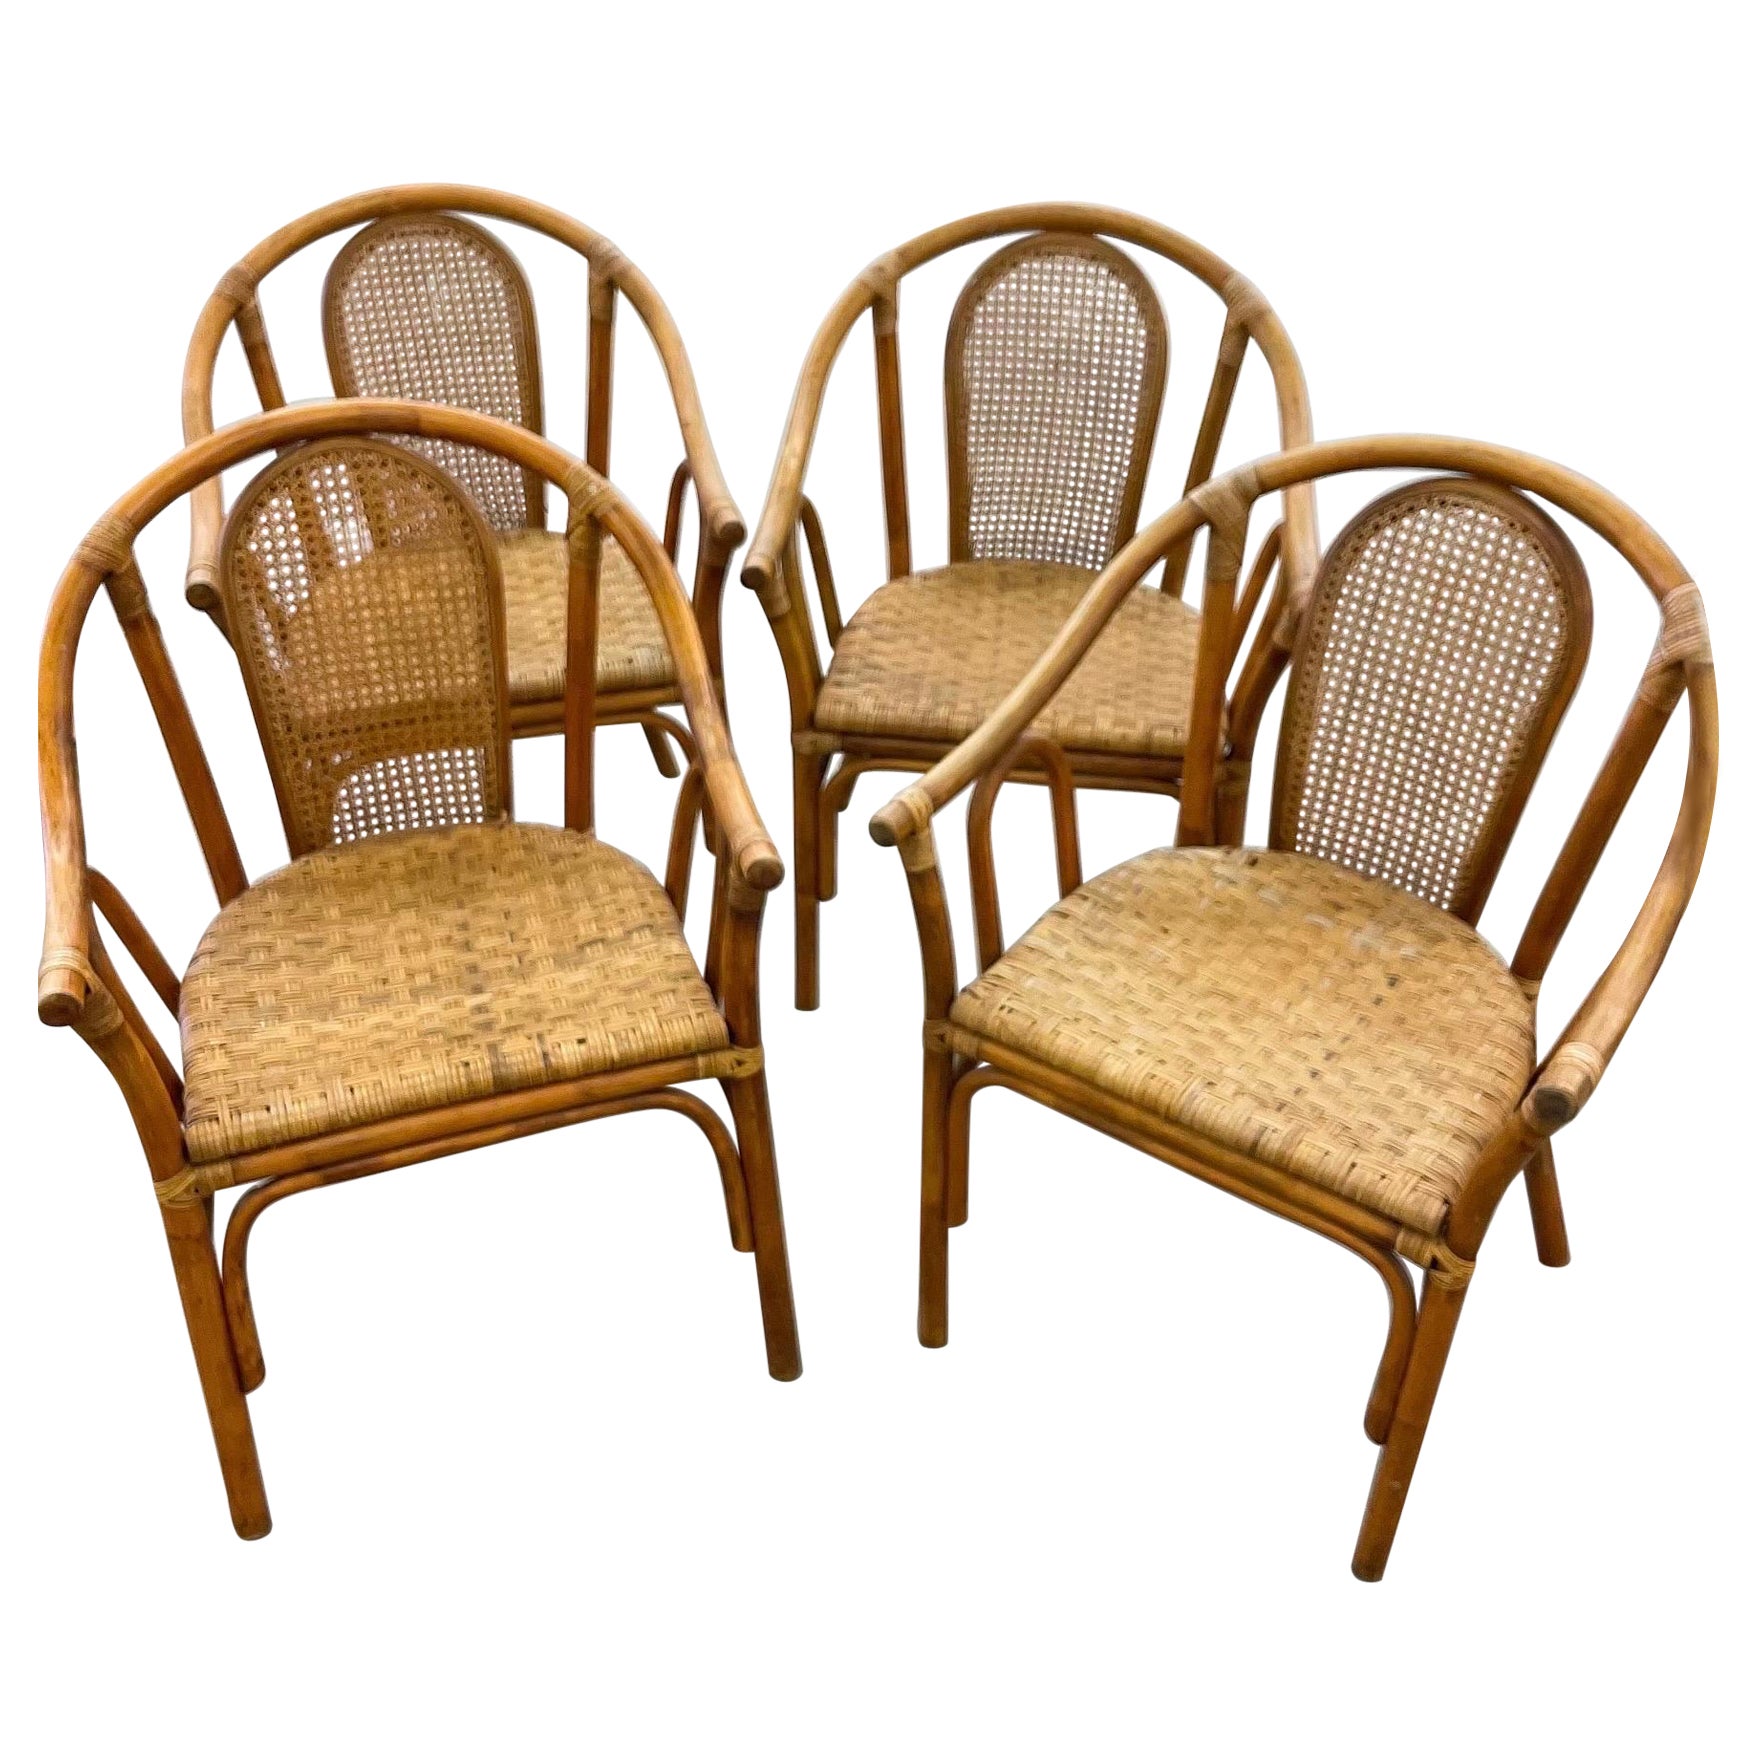 Mid 20th Century Bamboo Rattan Dining Chairs With Cane Inset Back - Set of 4 For Sale